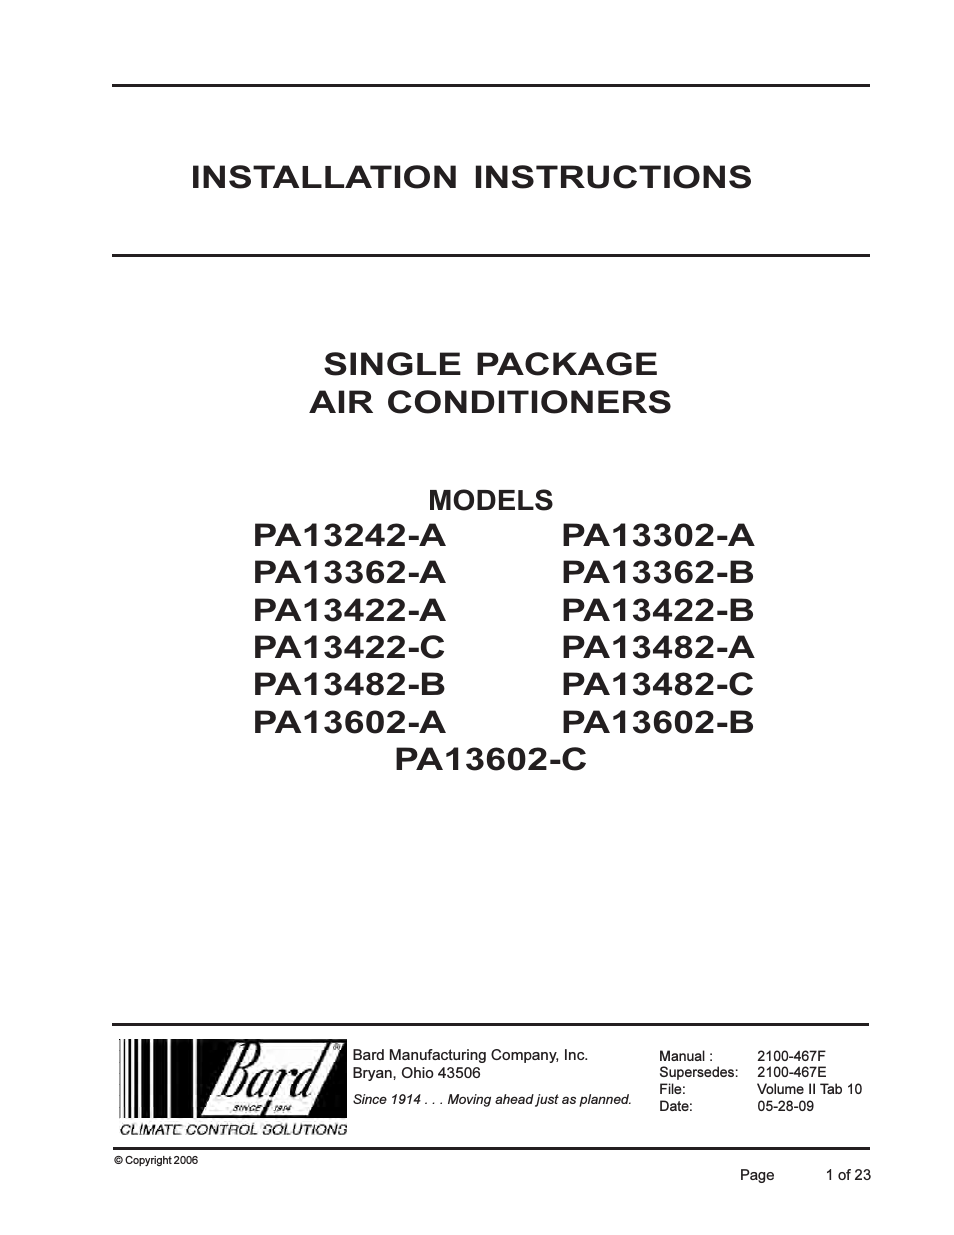 Single Package Air Conditioners PA13482-C